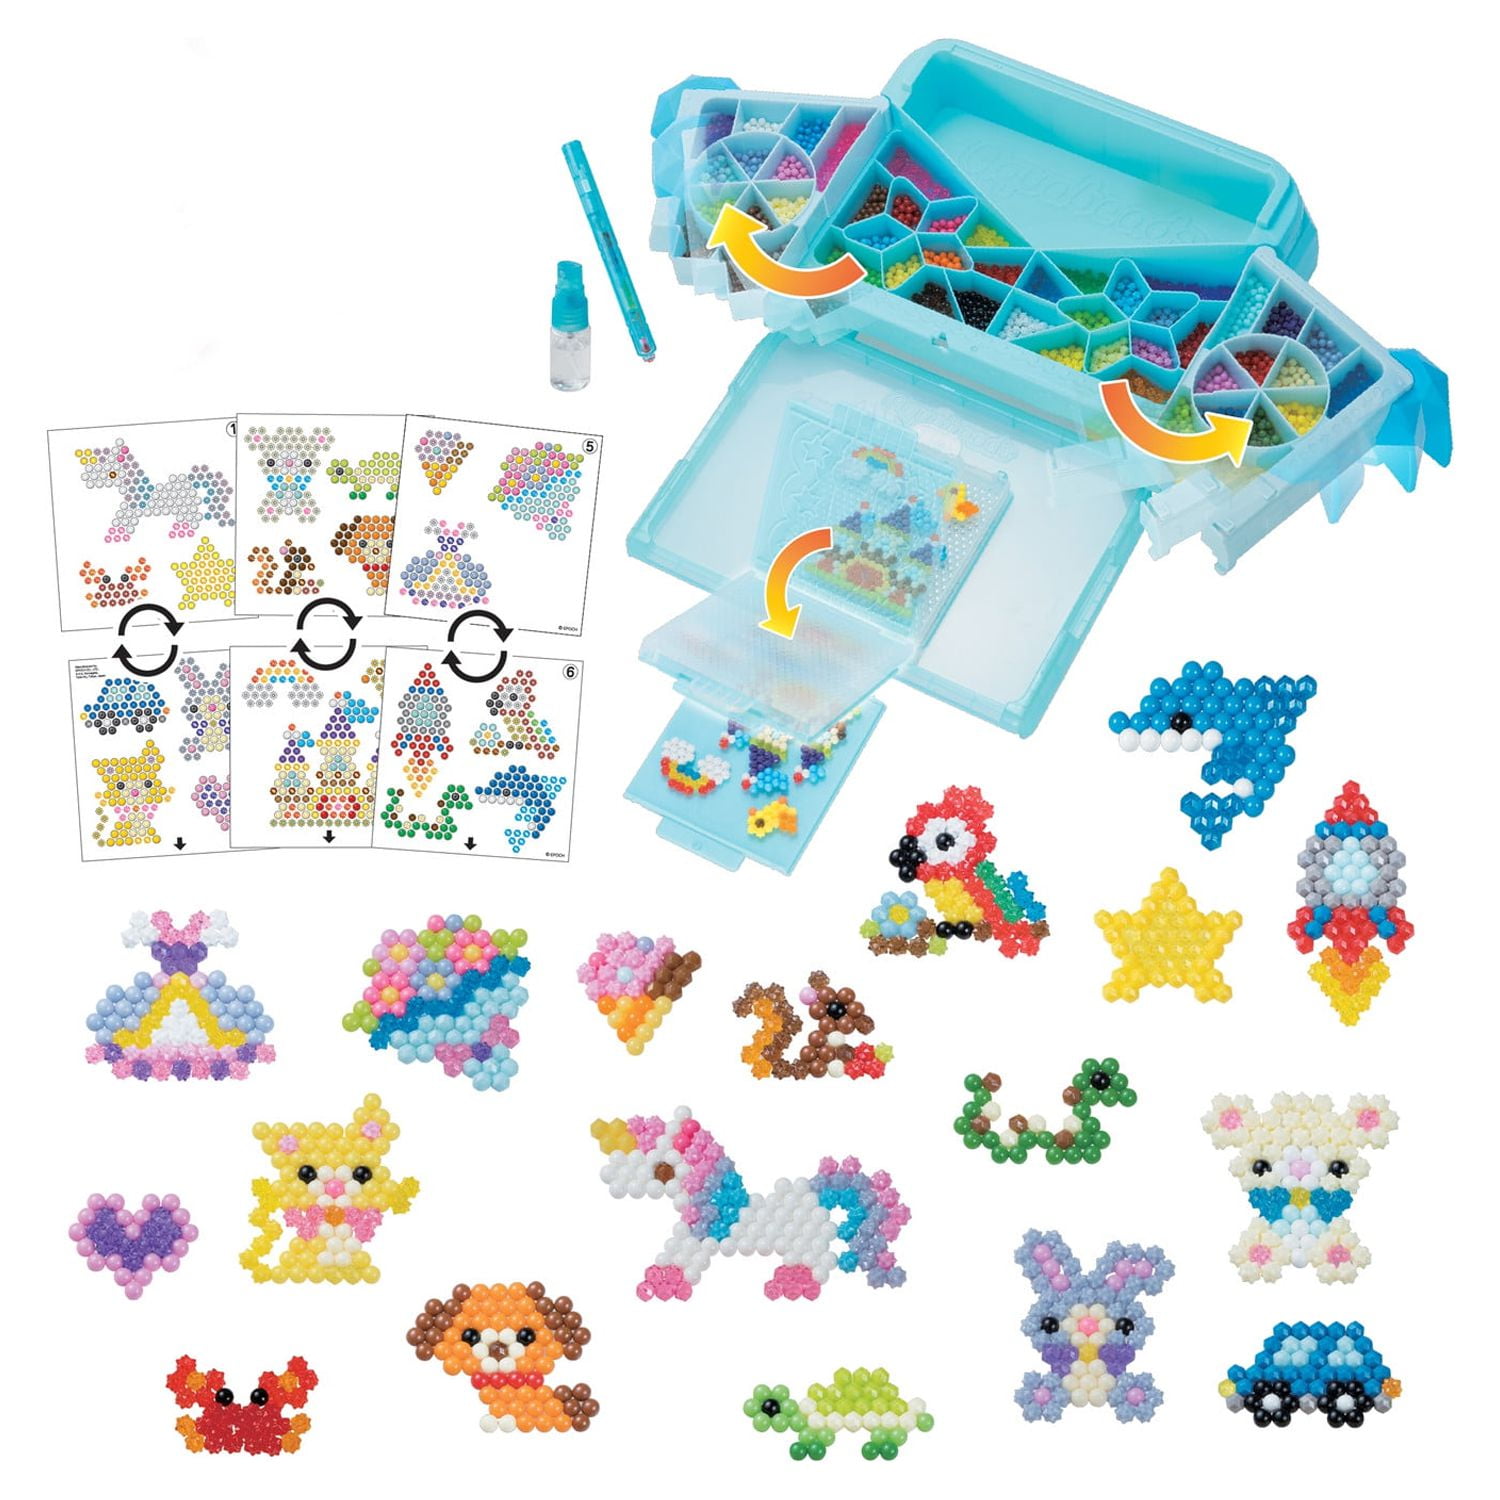 Aquabeads Design Factory Complete Arts & Crafts Bead Kit for